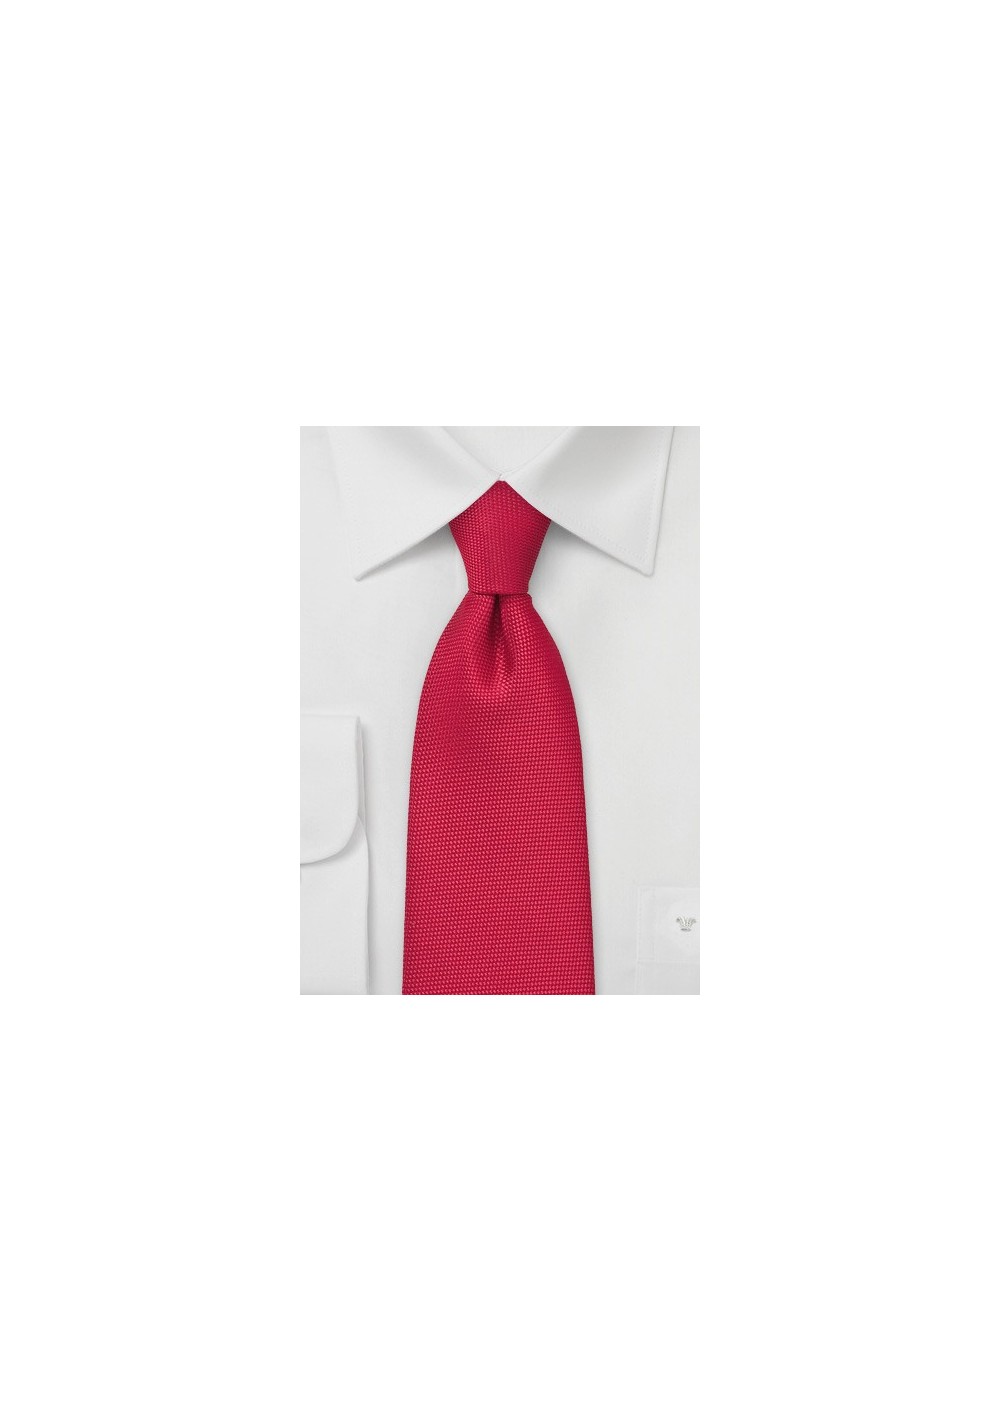 Bright Red Tie with Textured Fabric